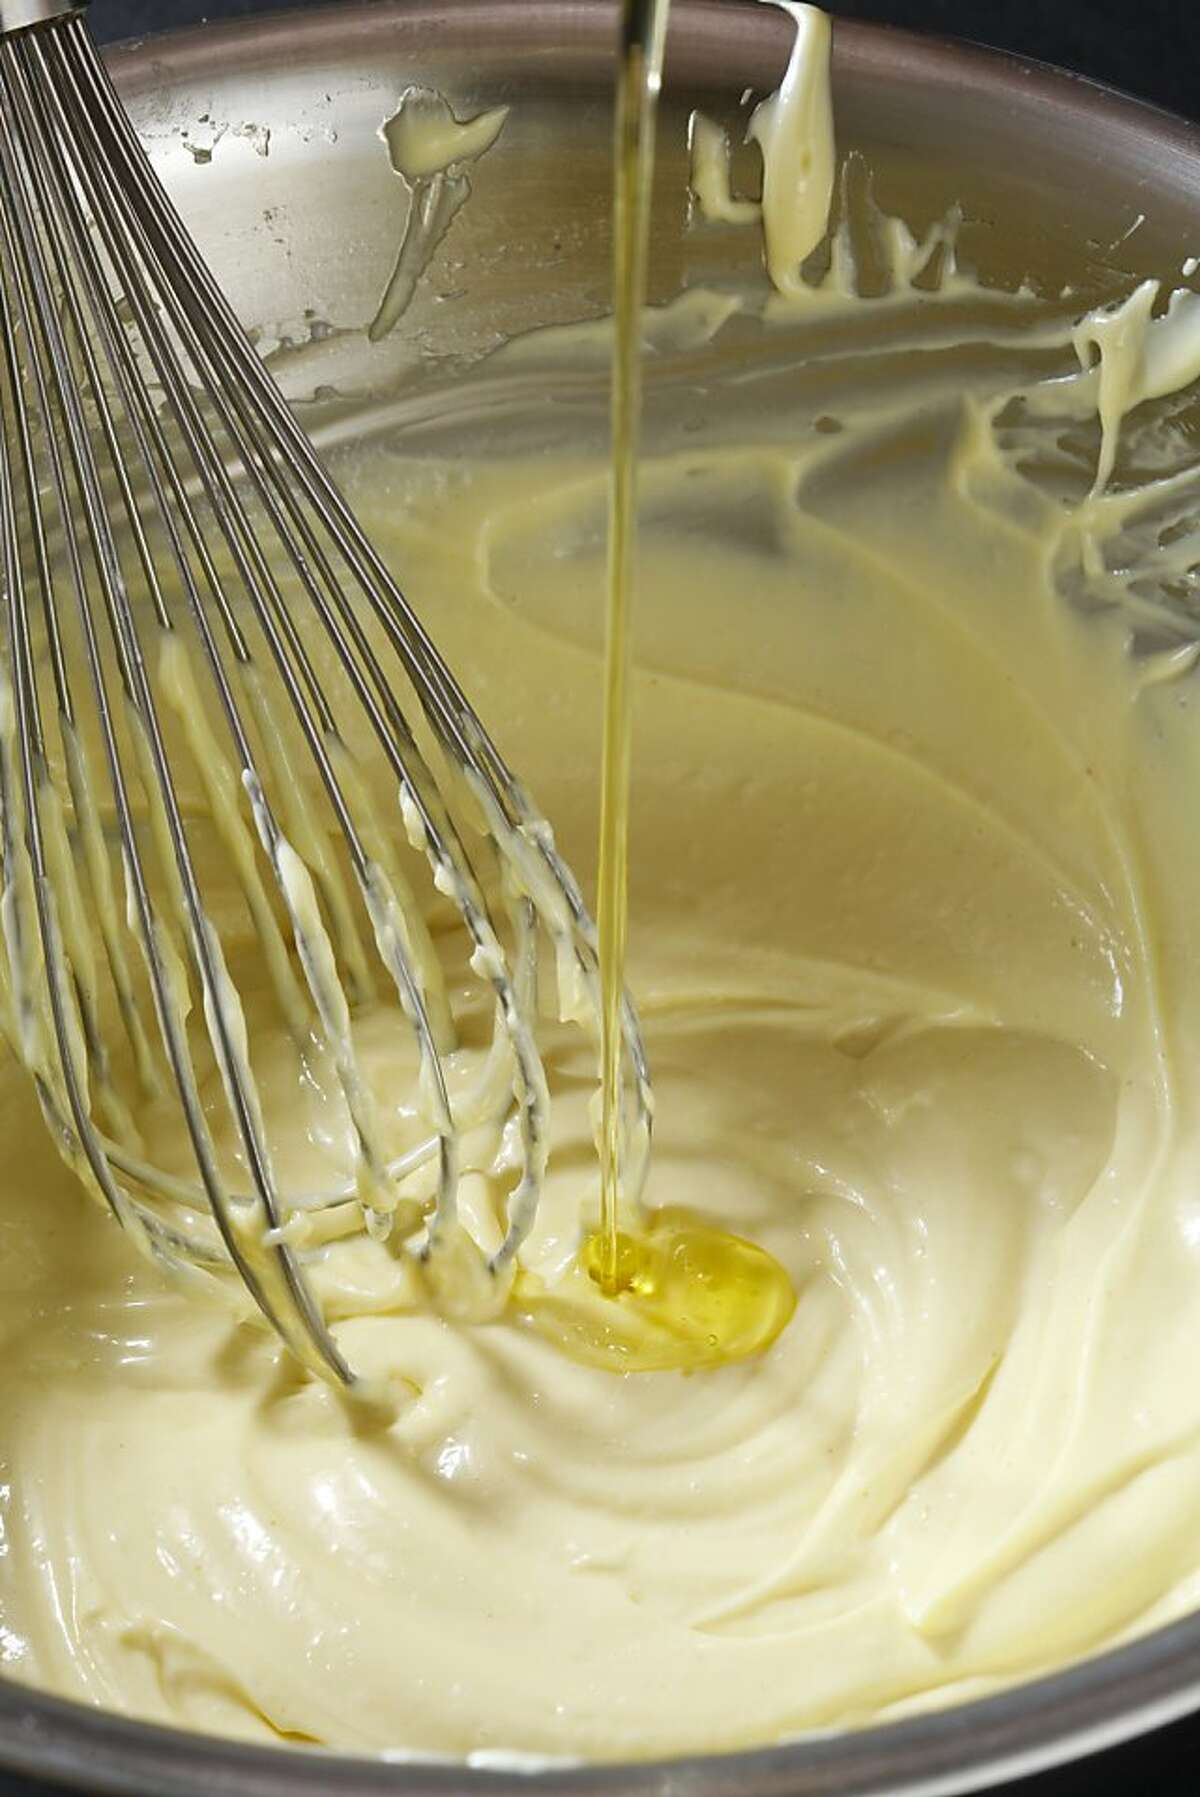 Master hollandaise and other silky sauces in time for Easter brunch.